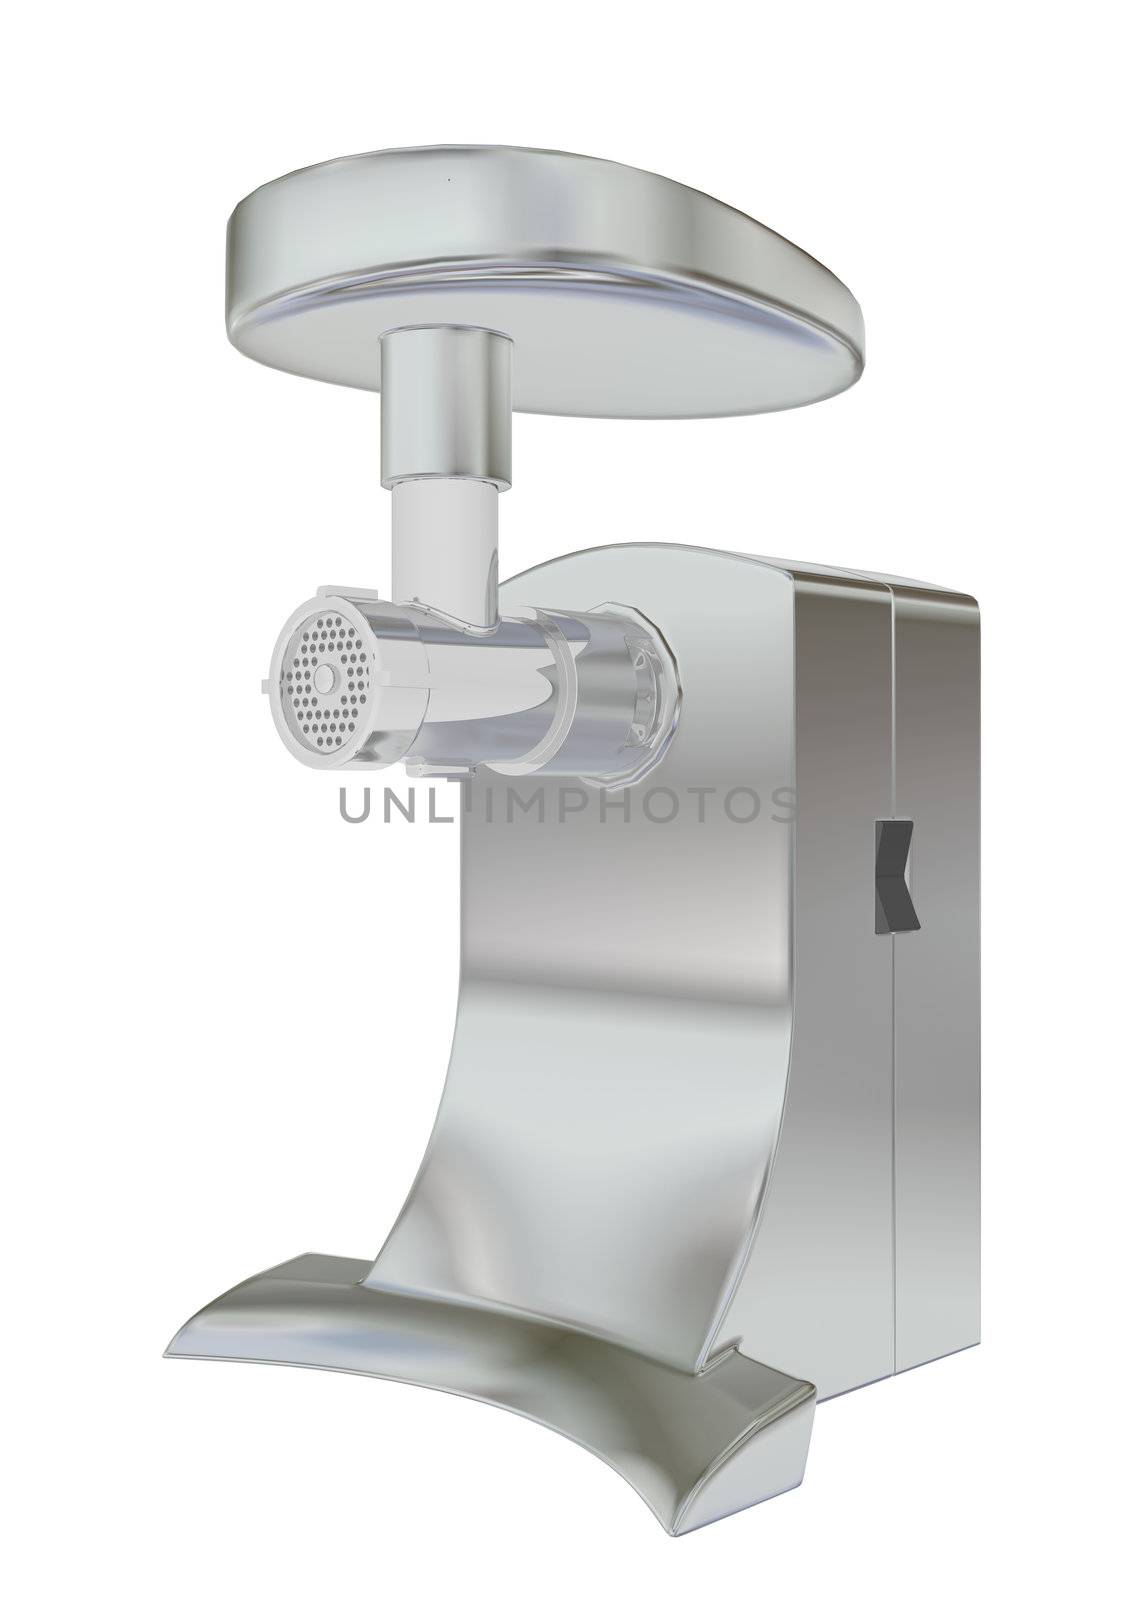 Stainless steel meat grinder, 3D illustration, isolated against a white background